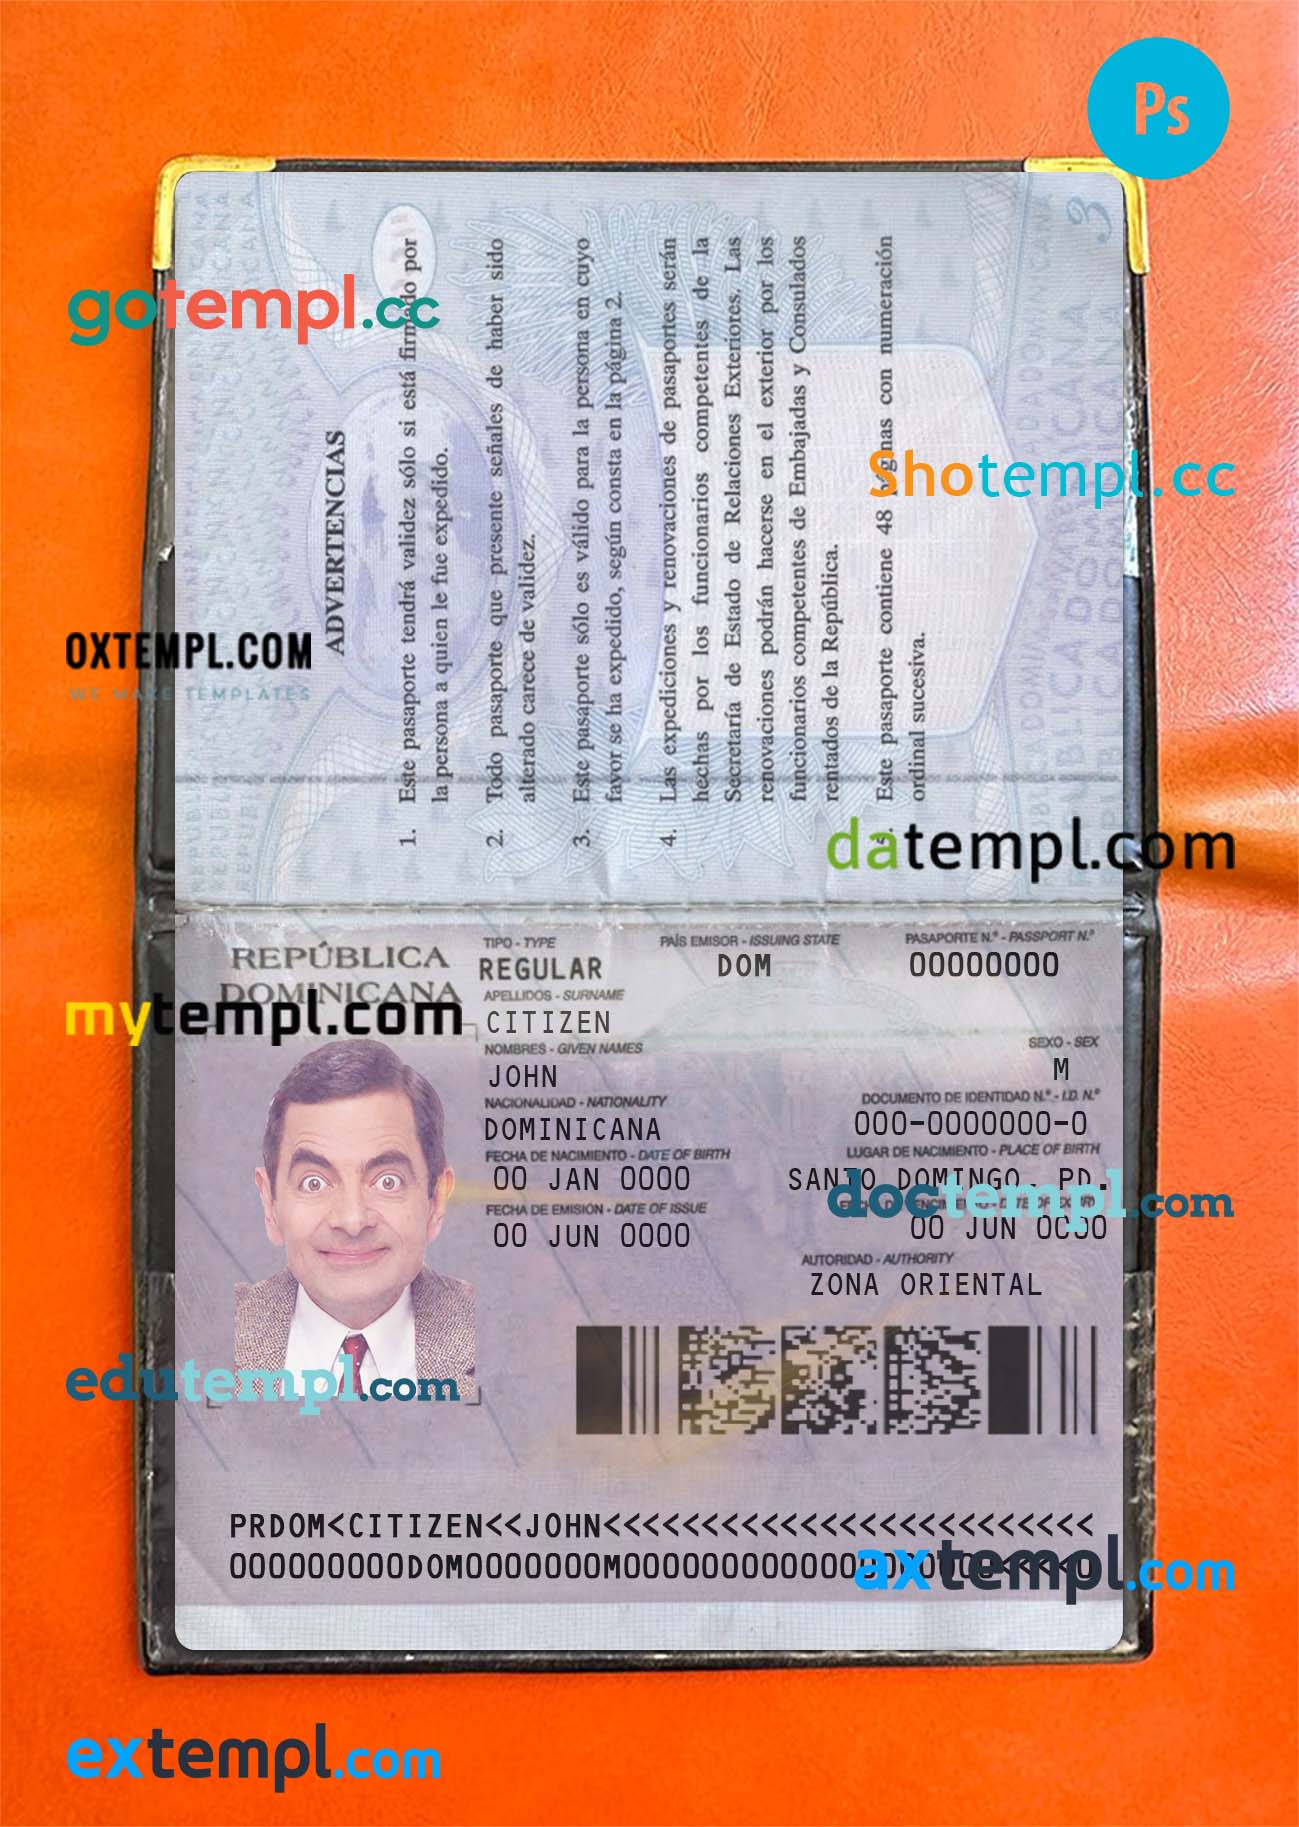 Dominican Repubic passport editable PSD files, scan and photo taken image, 2 in 1